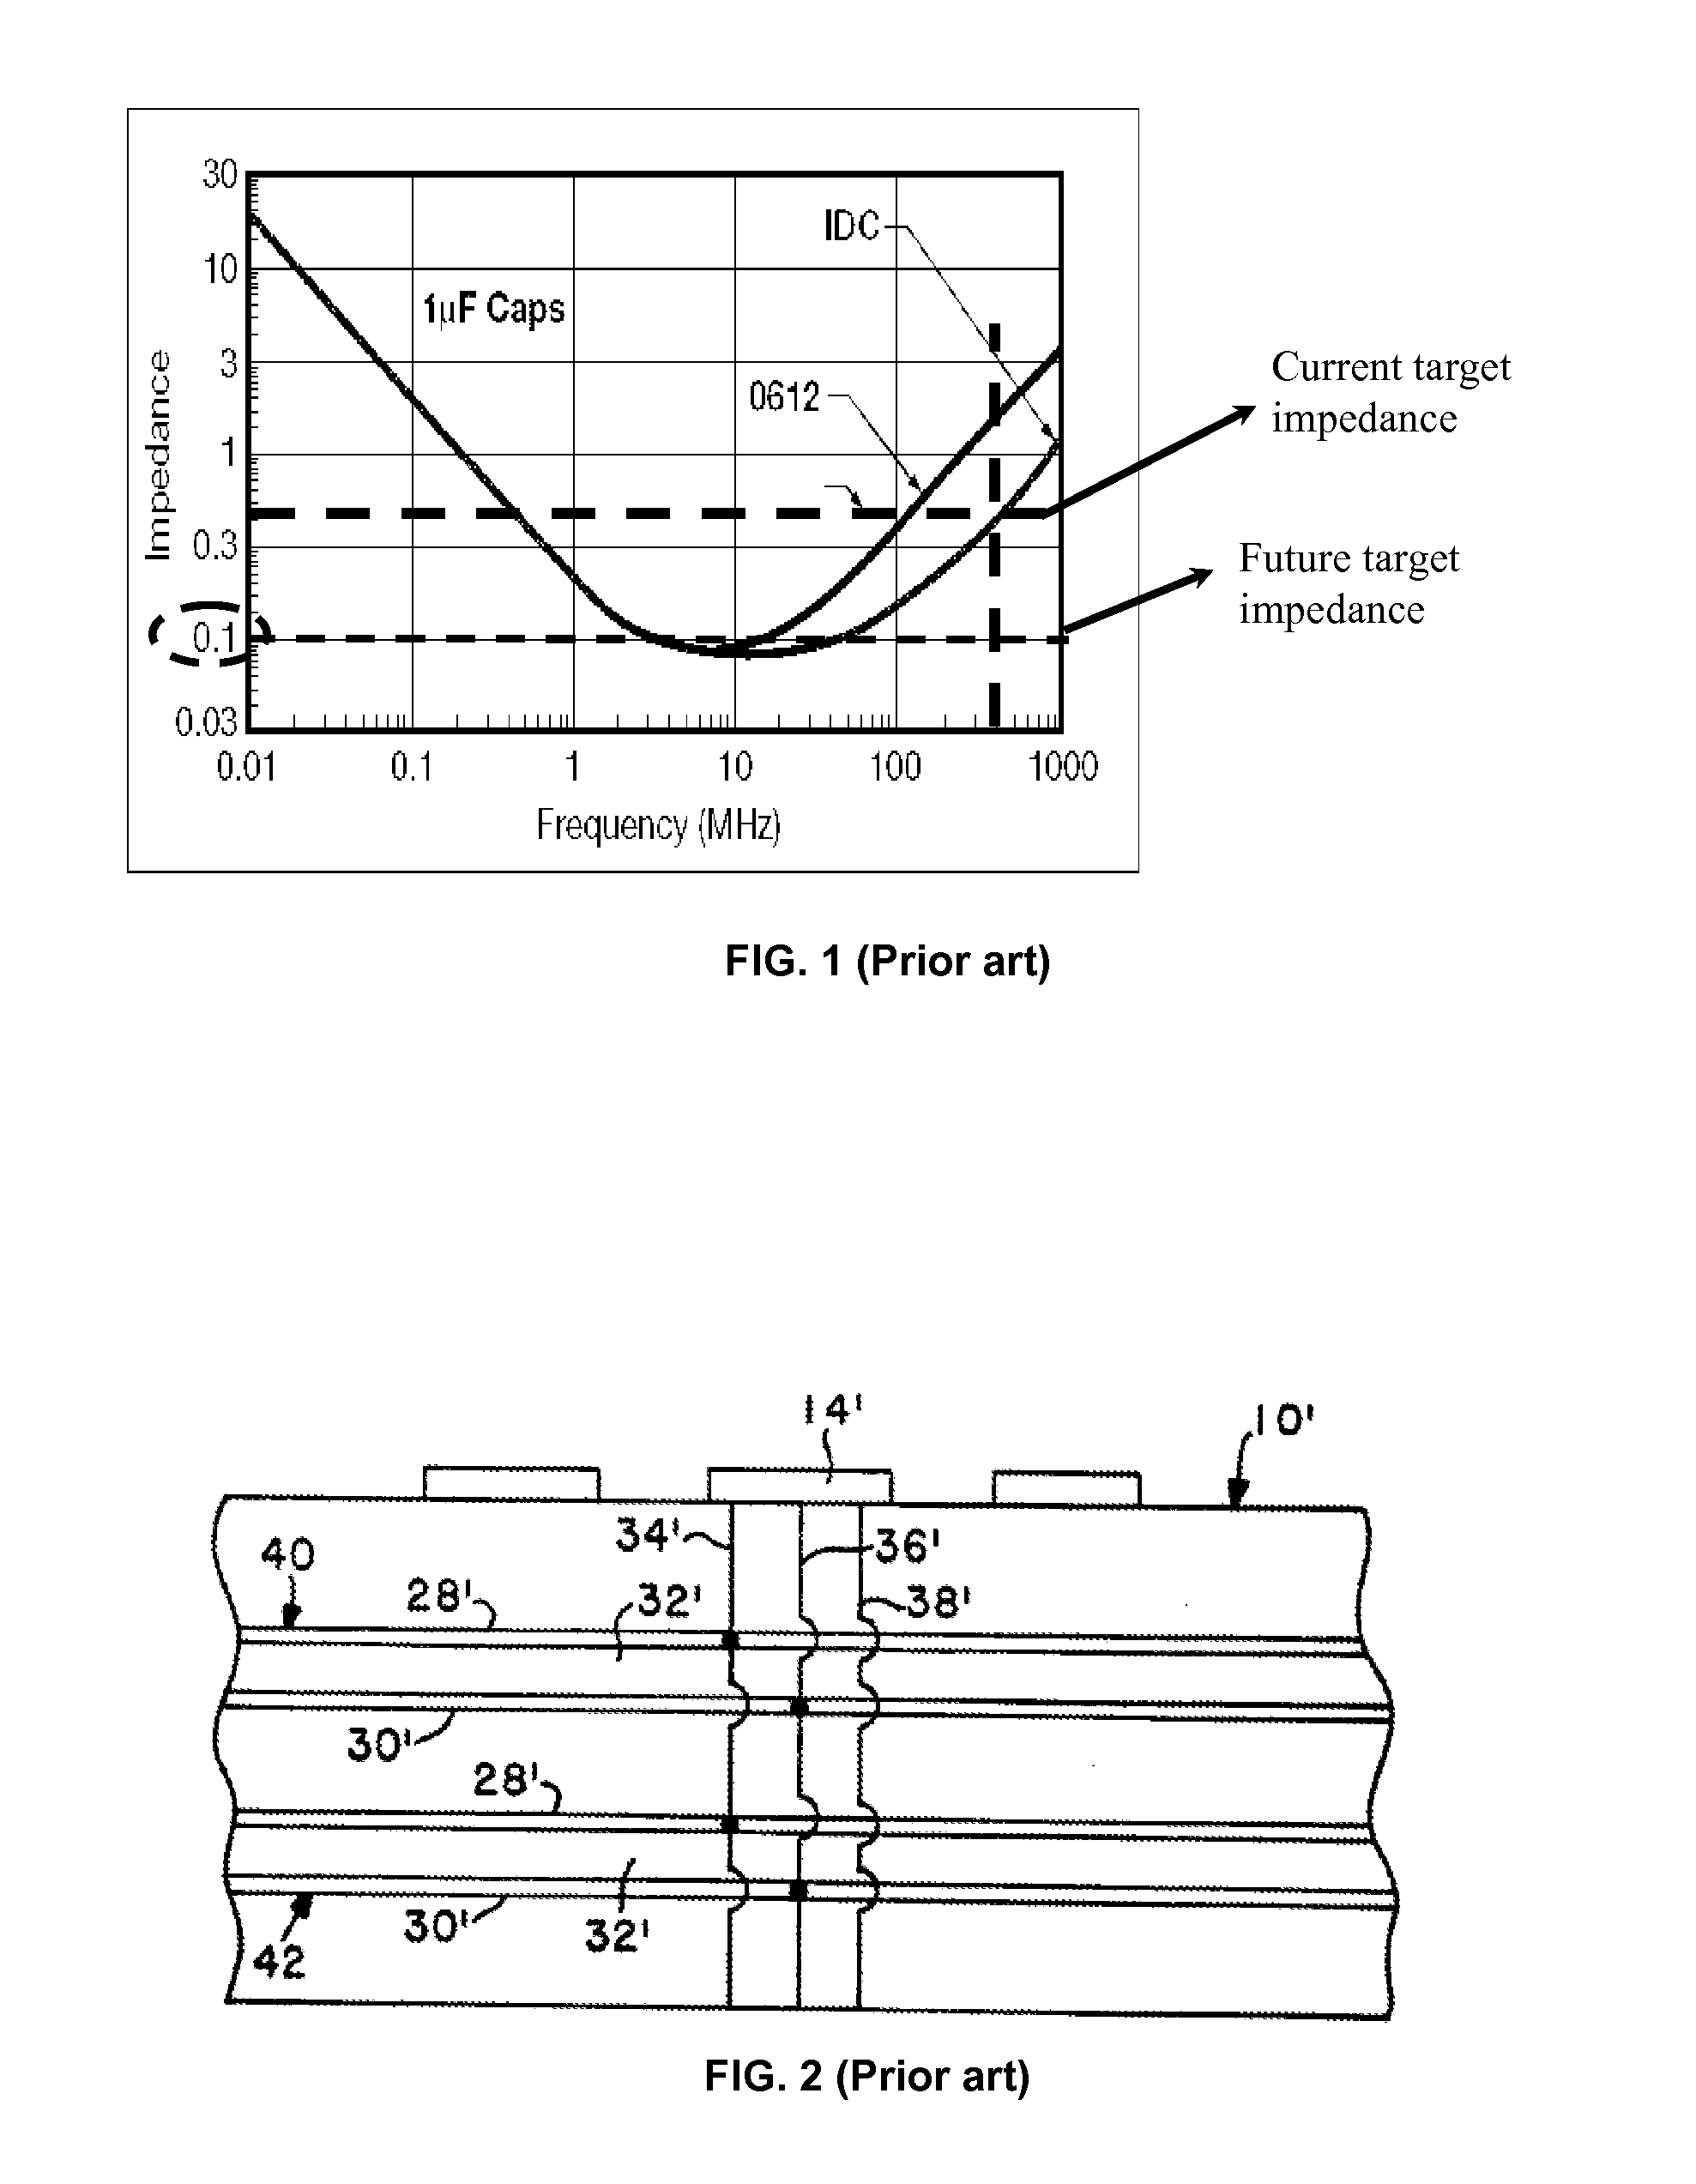 Wiring structure of laminated capacitors